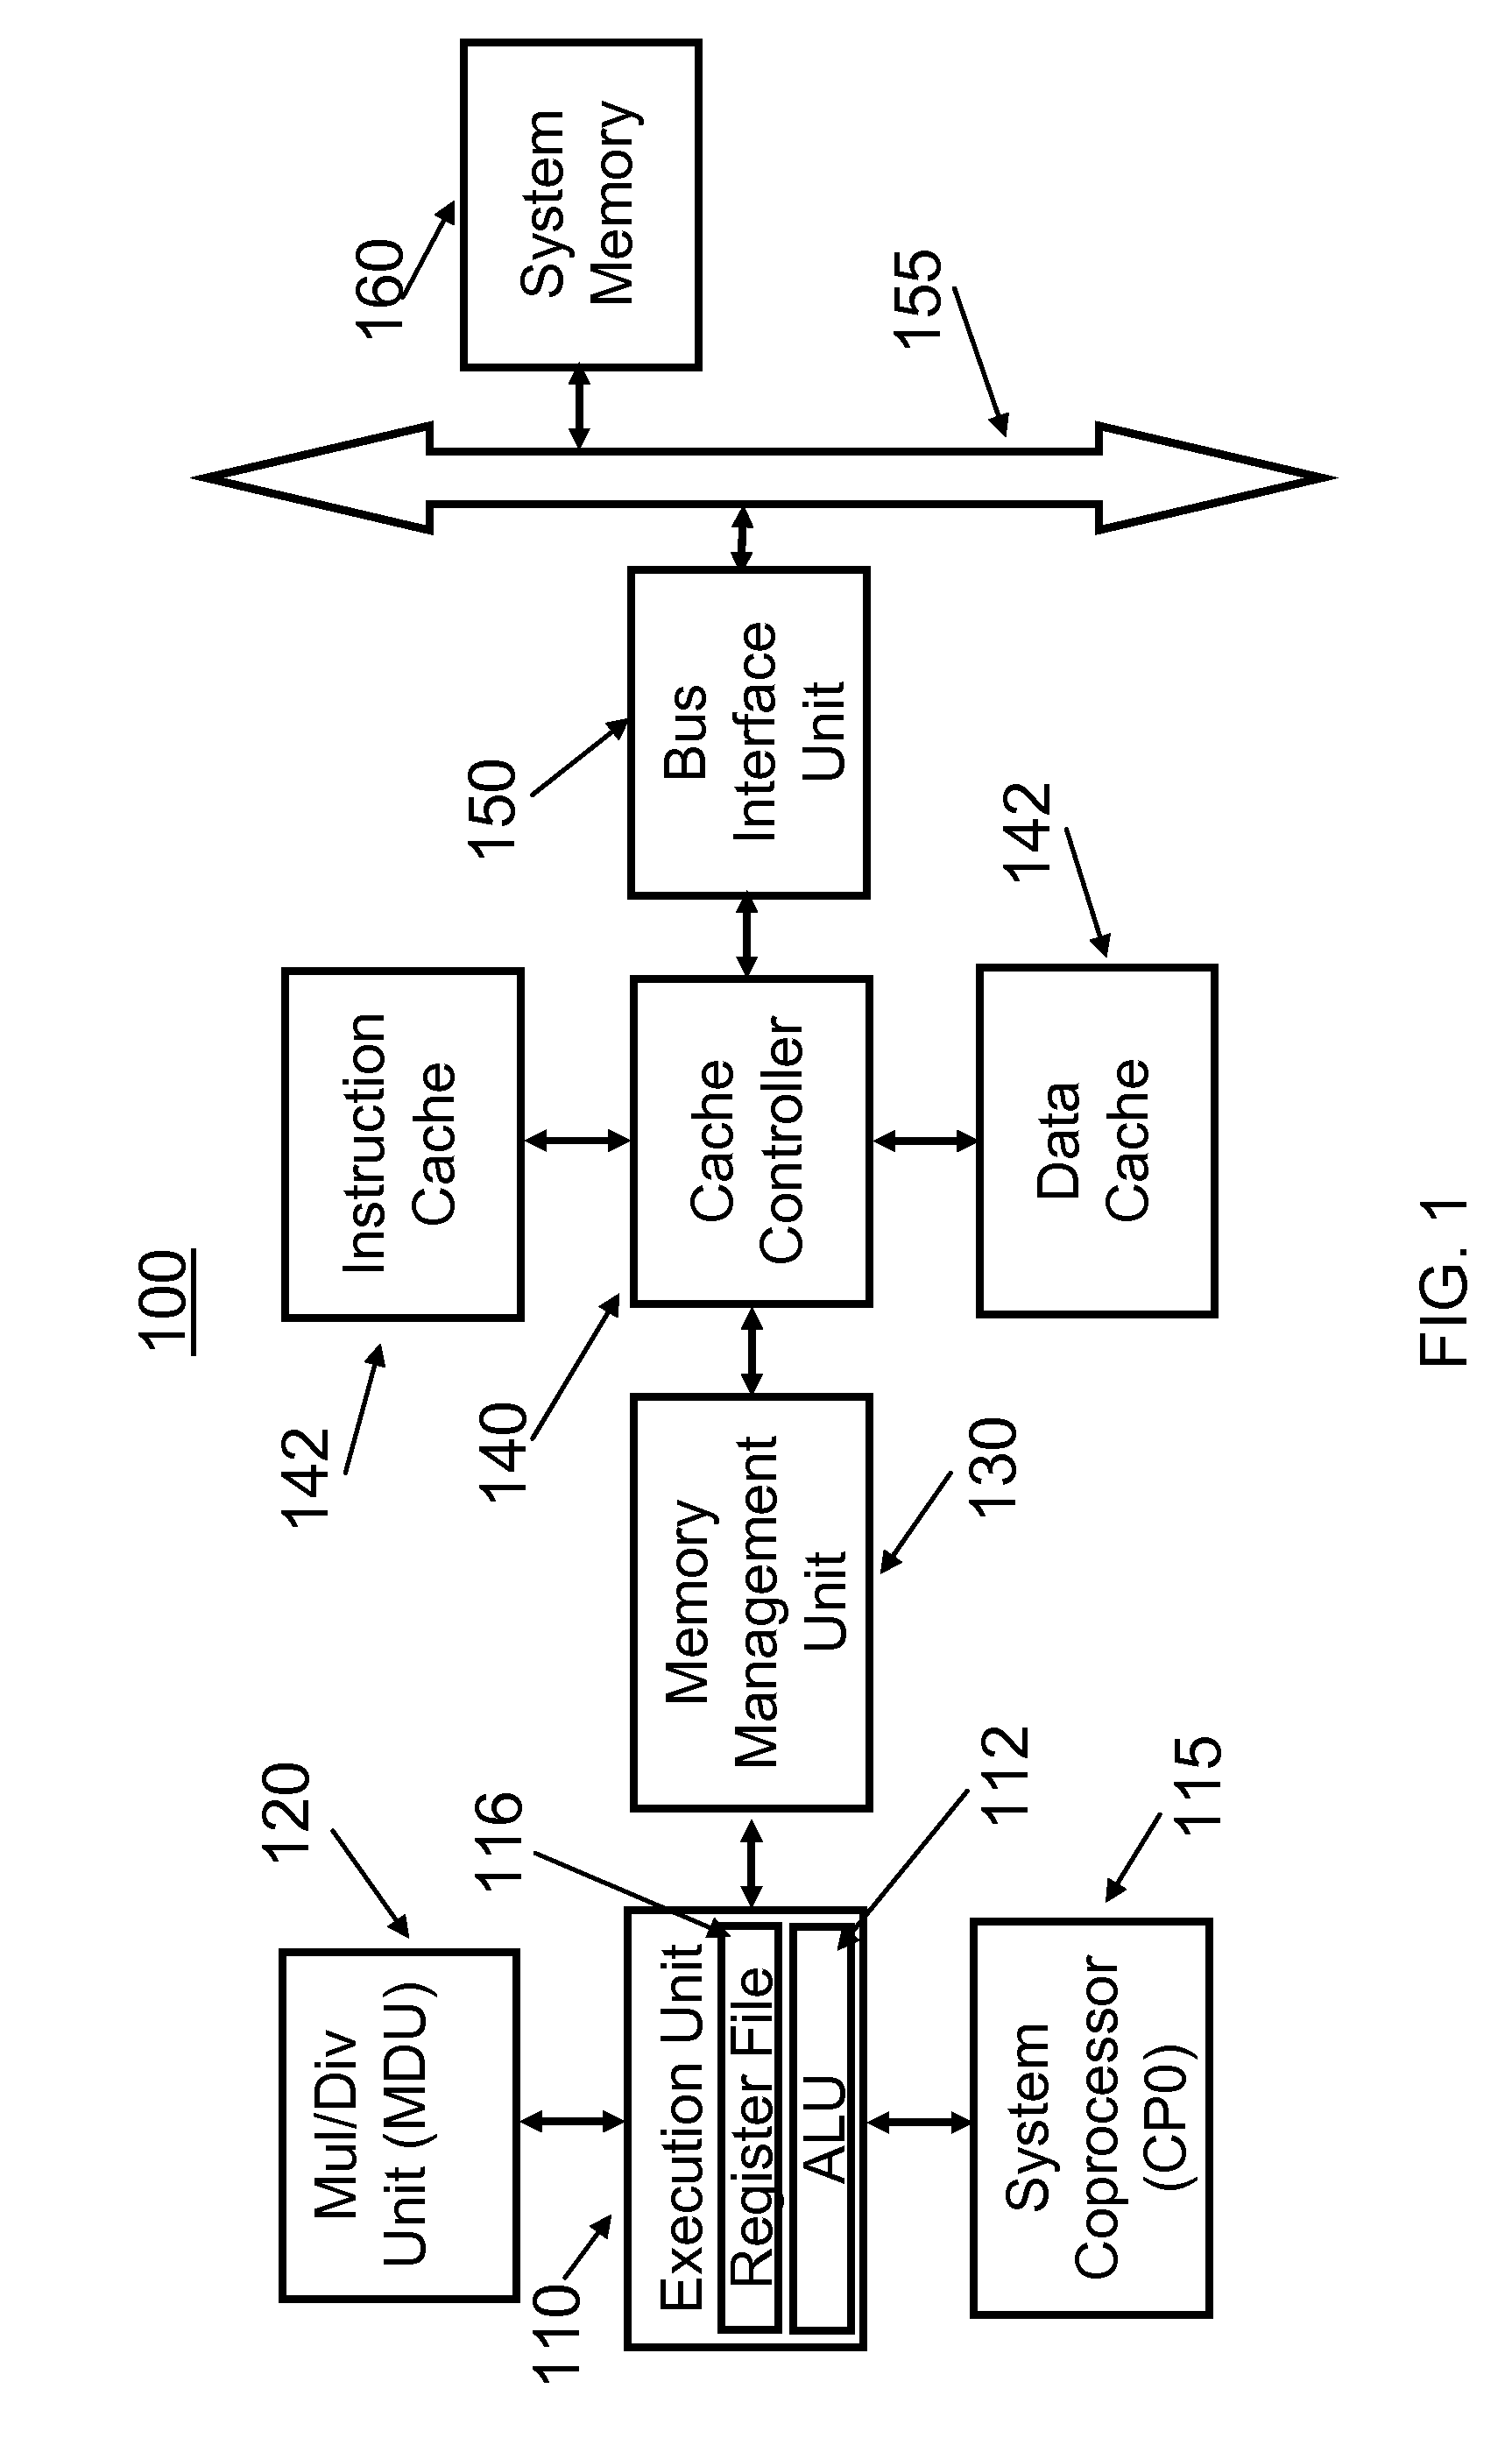 Variable register and immediate field encoding in an instruction set architecture